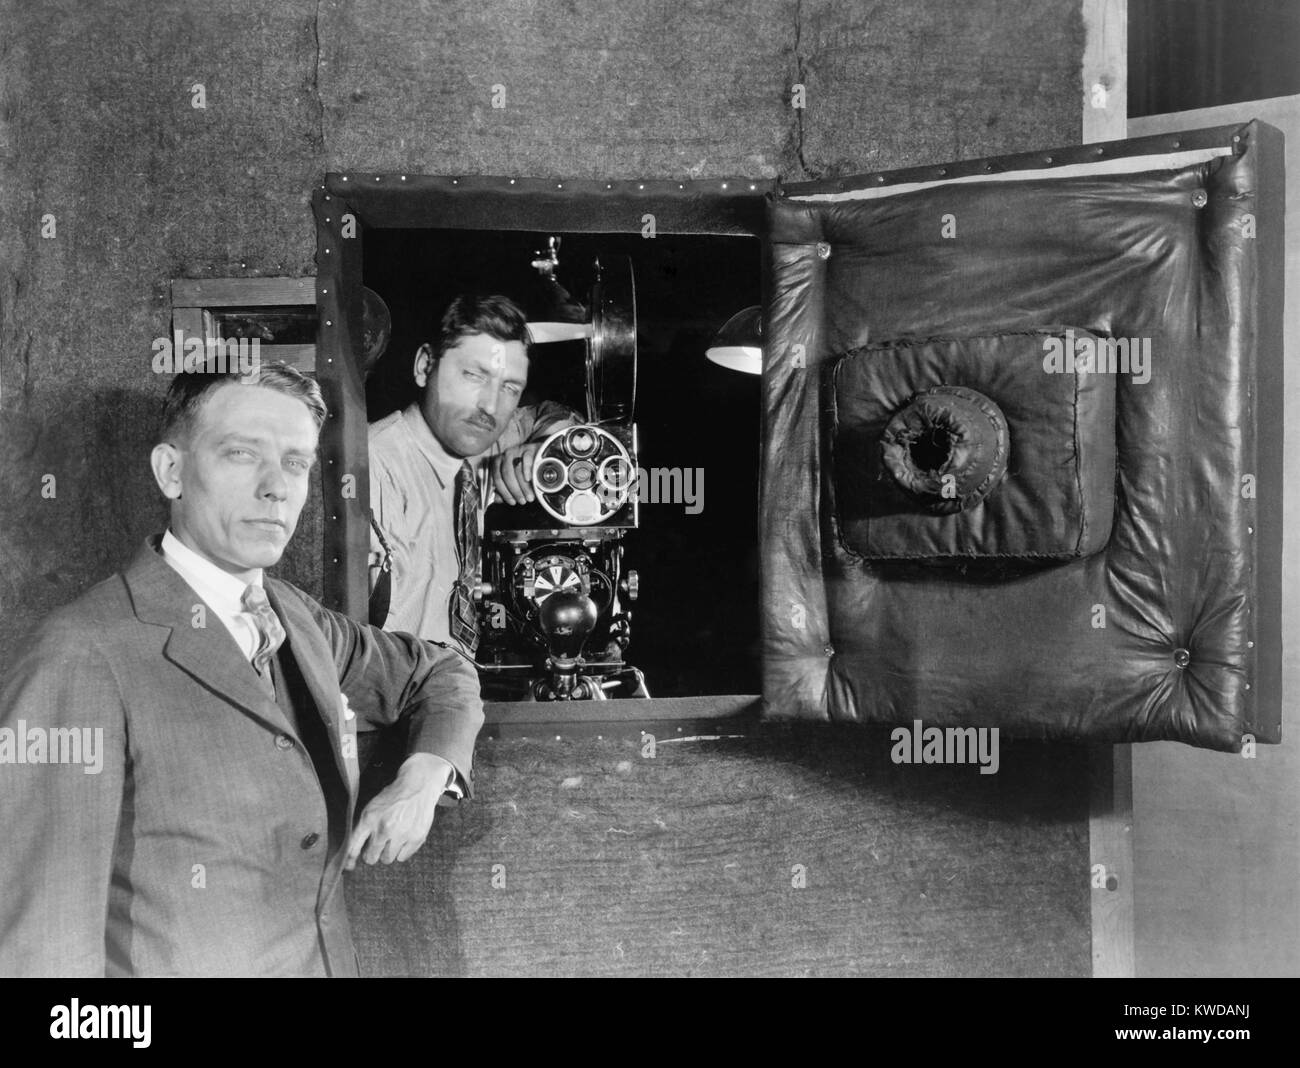 Soundproof camera booth designed to allowed actors voices to be recorded while filming, 1926. Designed by Western Electric Company, the 1926 booth was mounted on wheels to allow movement. It is inspected by H.C. Humphrey (left) of Bell Telephone Laboratories and Charles E. Davis (right), a Warner Brothers cameraman (BSLOC 2016 10 19) Stock Photo